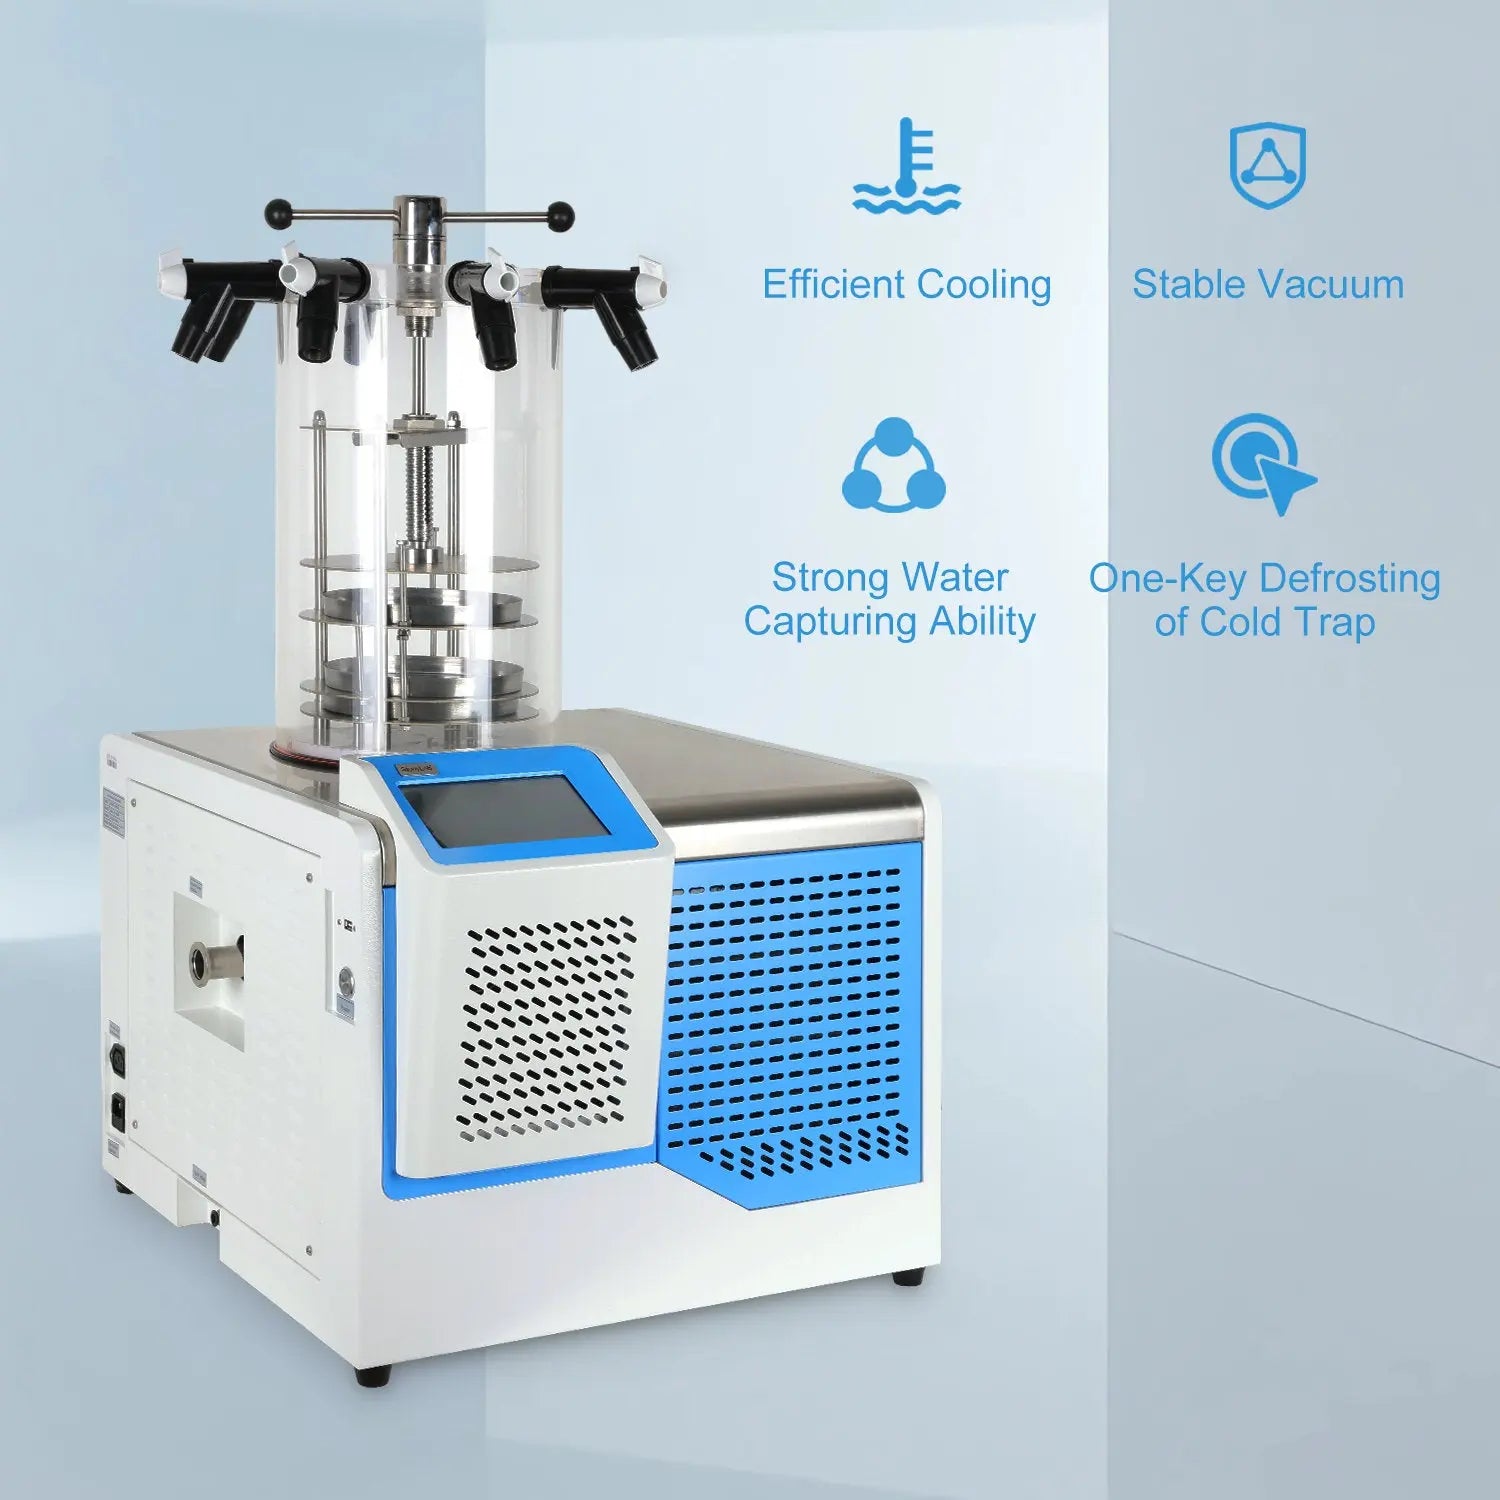 Laboratory Freeze Dryer: A Comprehensive Guide to Freeze Drying in